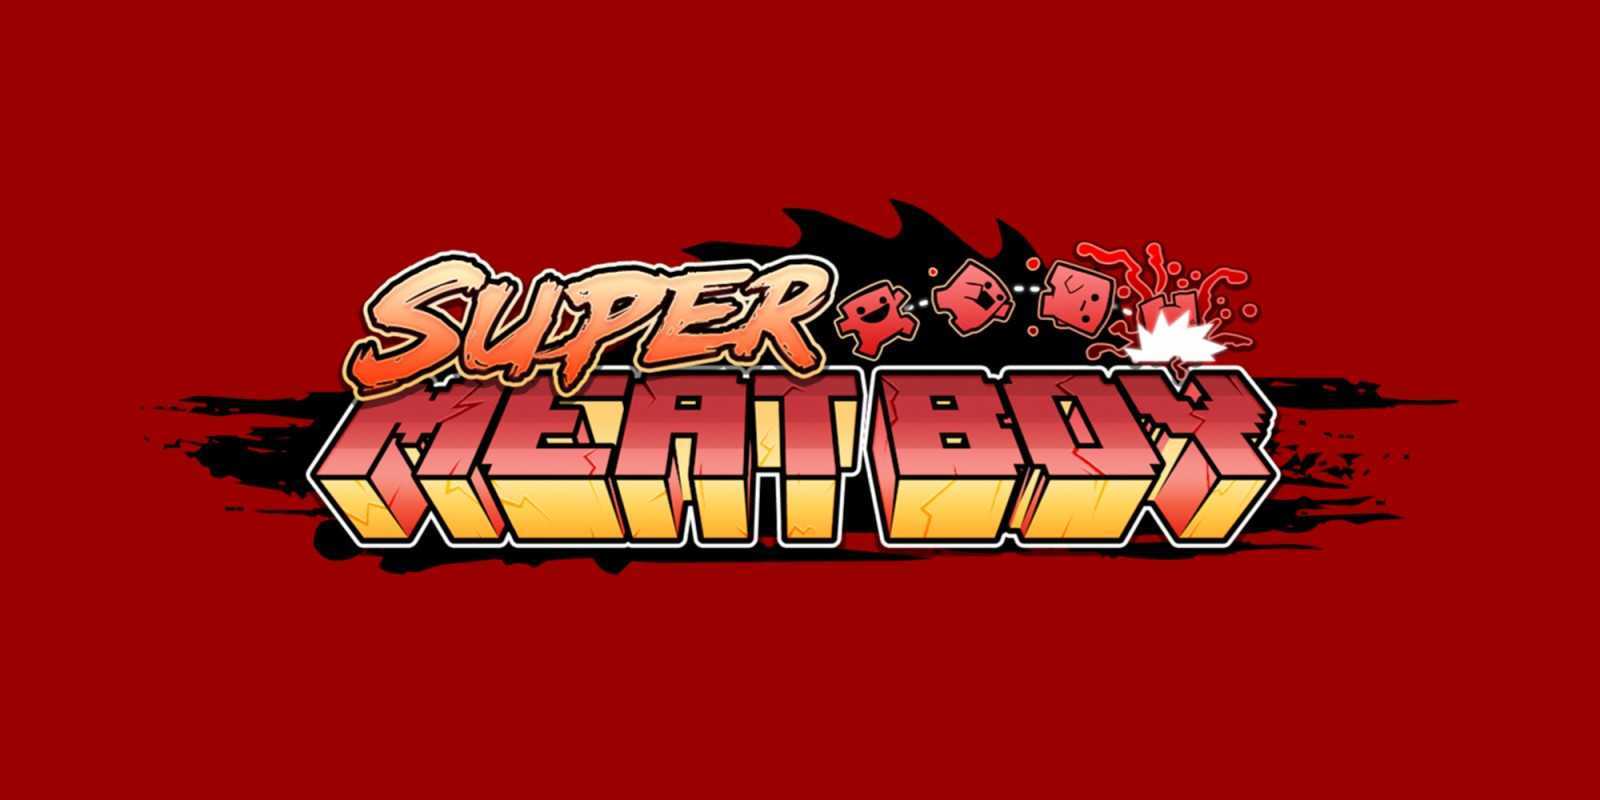 Super Meat Boy Race Mode Edition Free Download